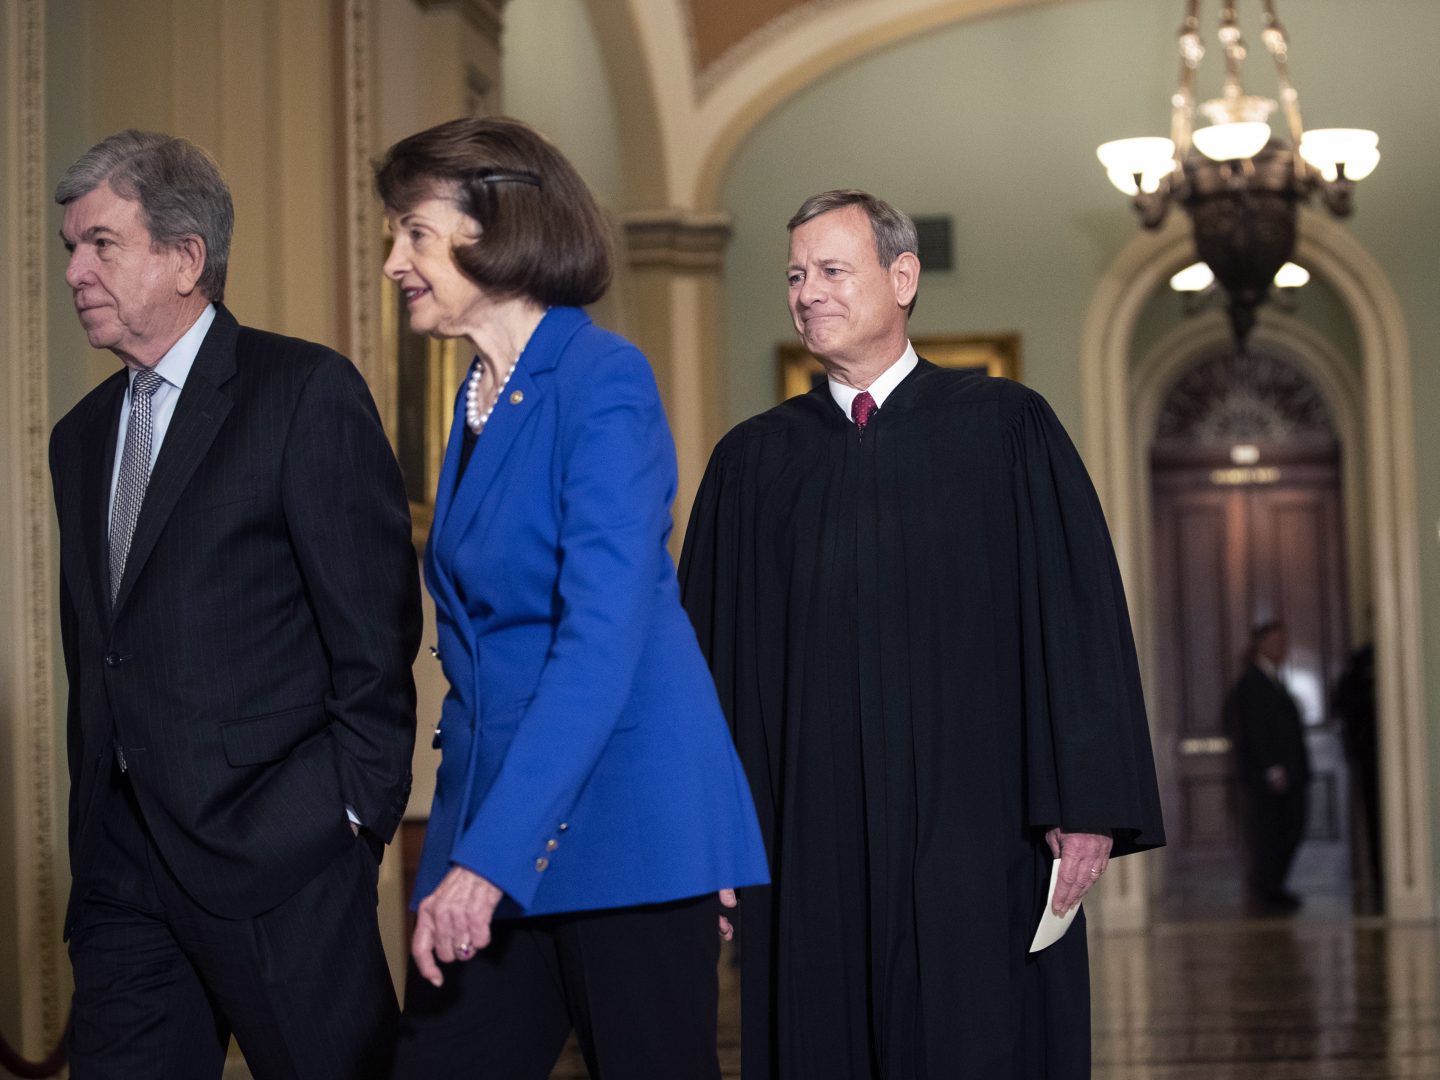 Sen. Roy Blunt, R-Mo. (left); Sen. Dianne Feinstein, D-Calif.; and Supreme Court Chief Justice John Roberts arrive to the Senate chamber for impeachment proceedings on Thursday.